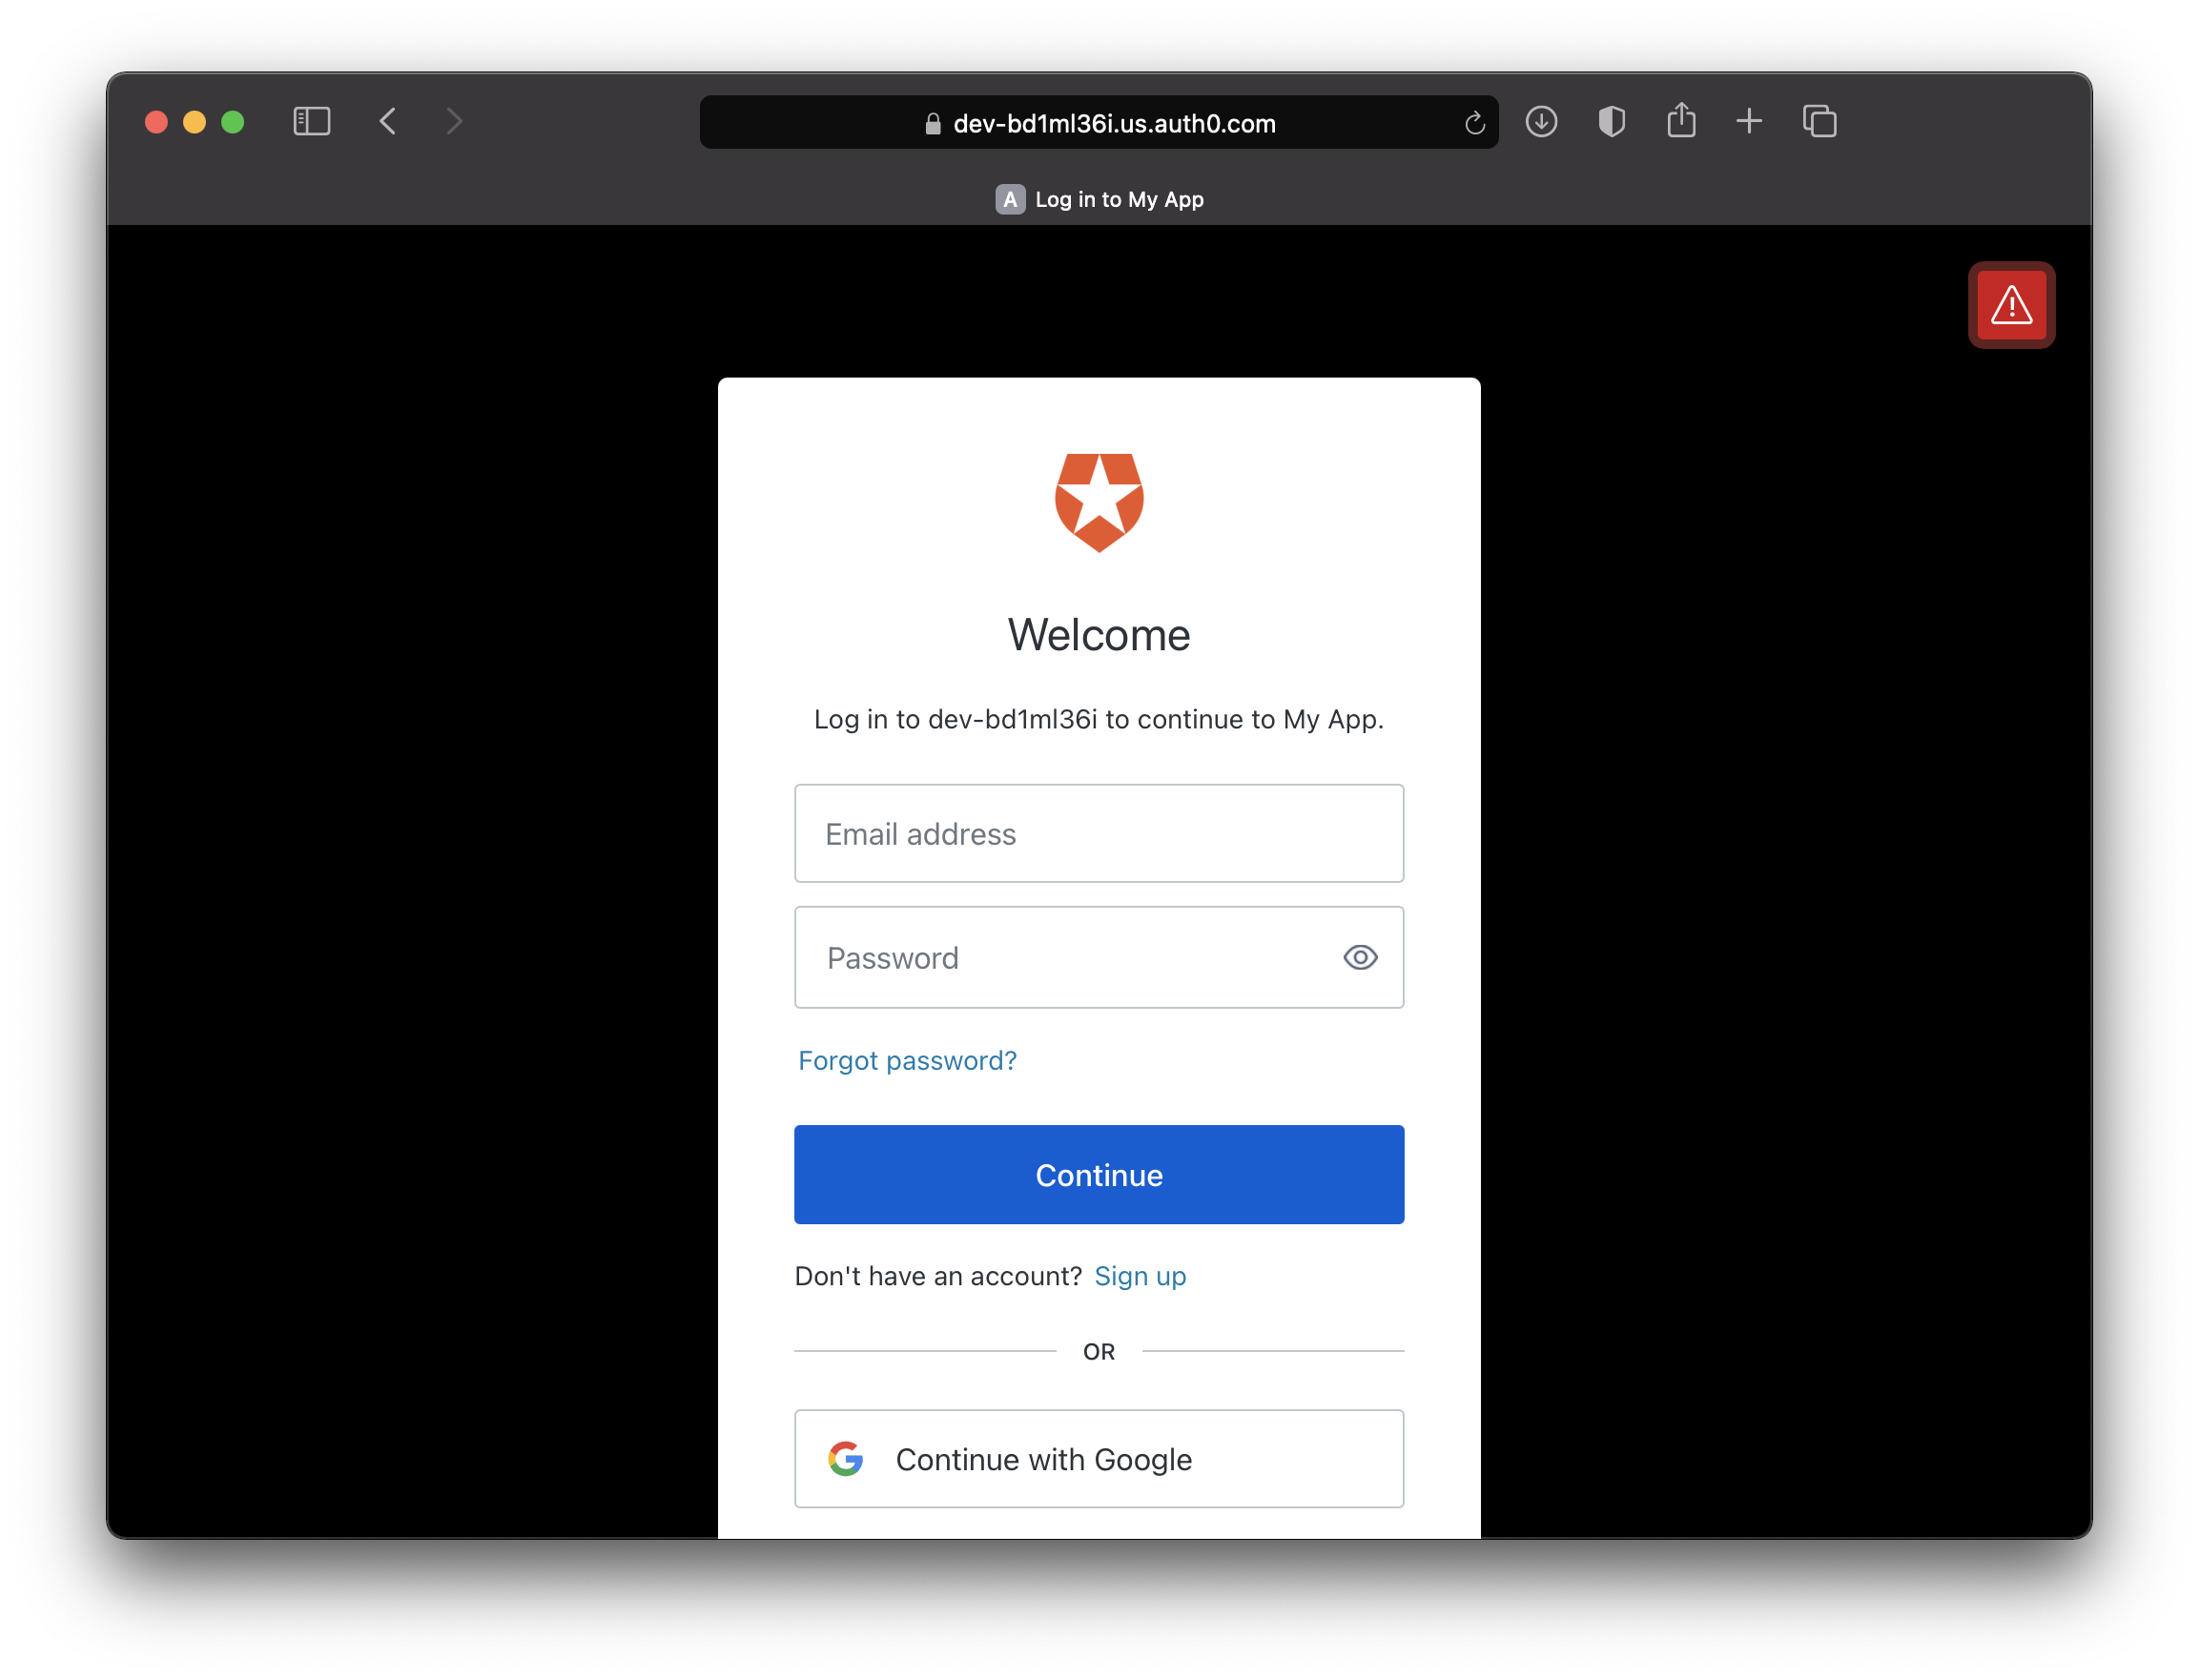 Auth0 login screen for OIDC.